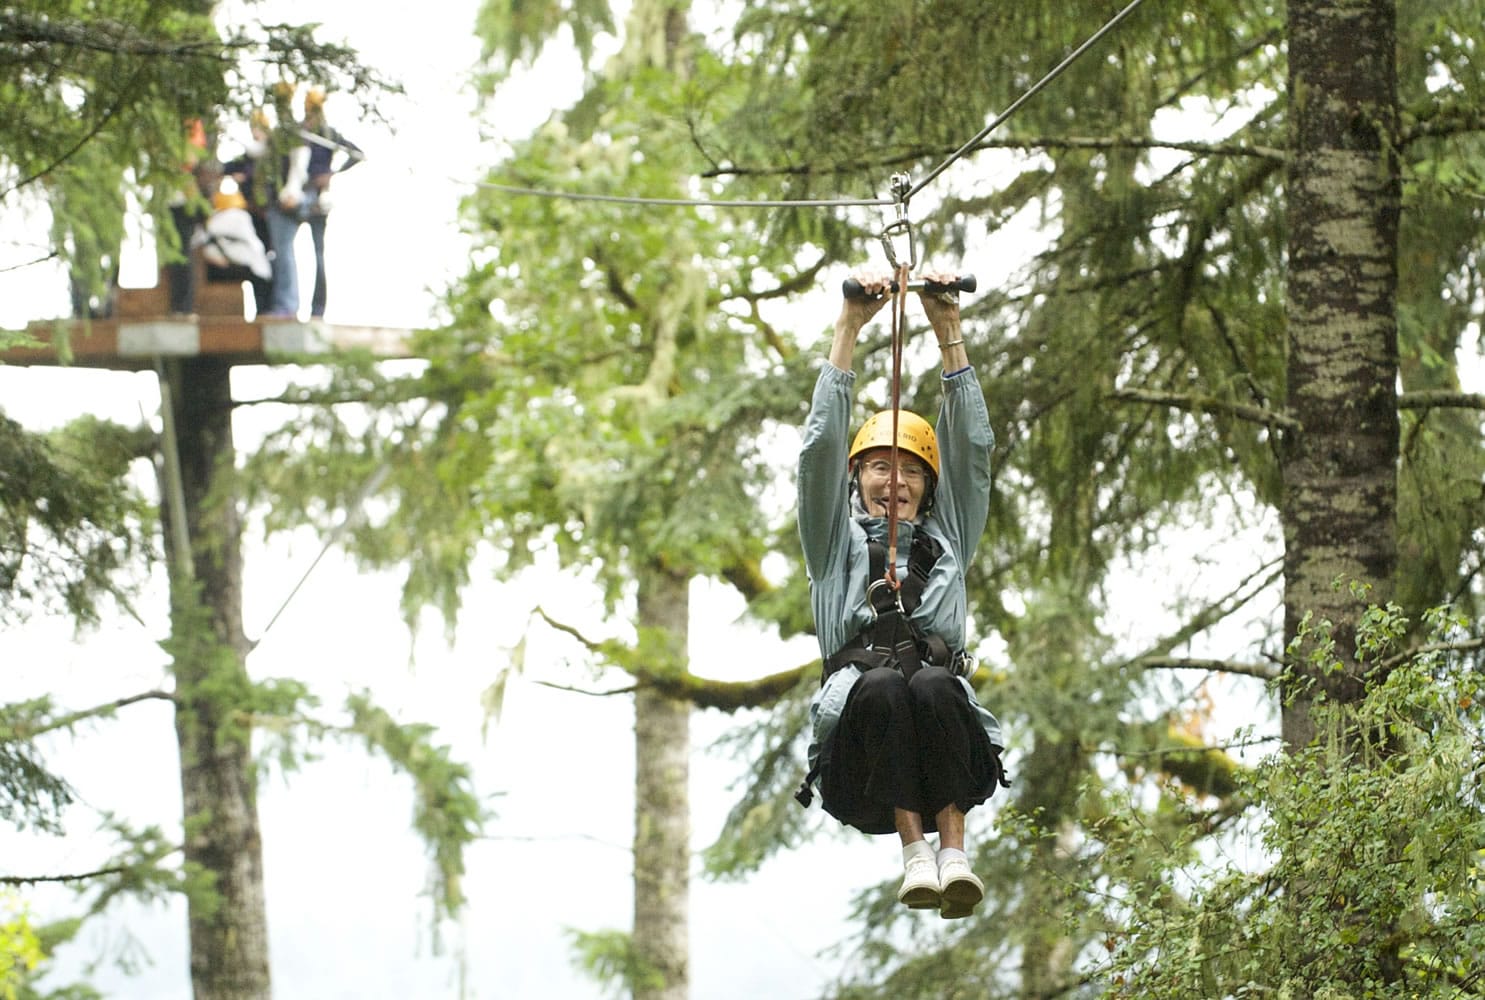 Photos by Steven Lane/The Columbian
Levina Strain, 95, rides a zip line at Tree to Tree Aerial Adventure Park in Gaston, Ore., in late September. But Strain said her real bucket-list wish is to visit her childhood home again.